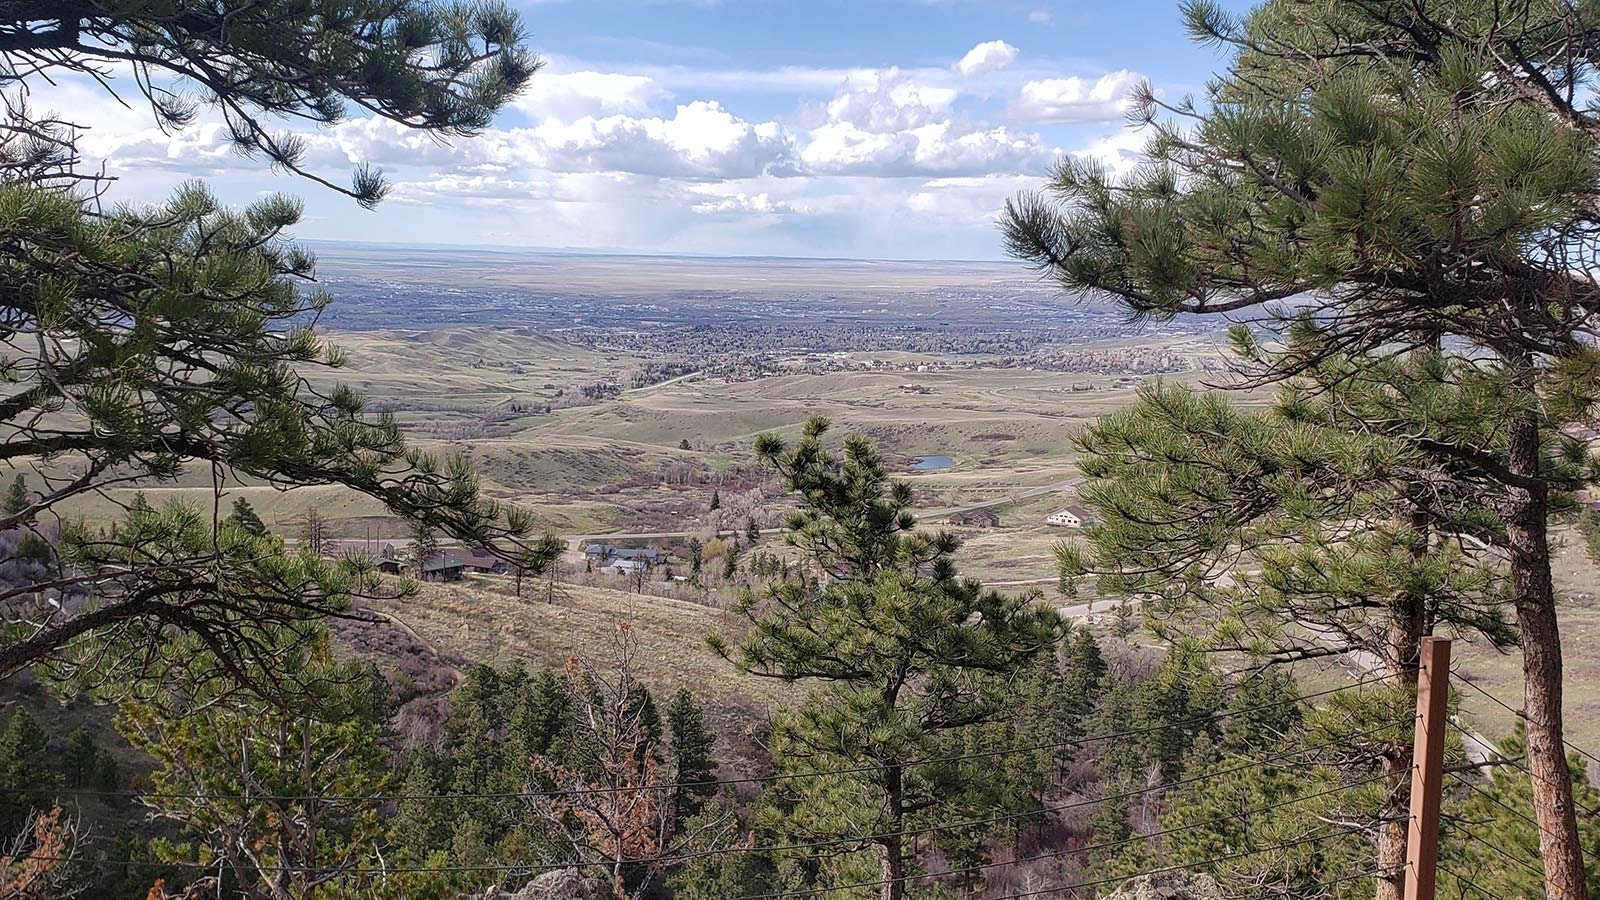 The city of Casper can be seen sprawled out below Garden Creek Falls, which is accessible by an easy spring hike.